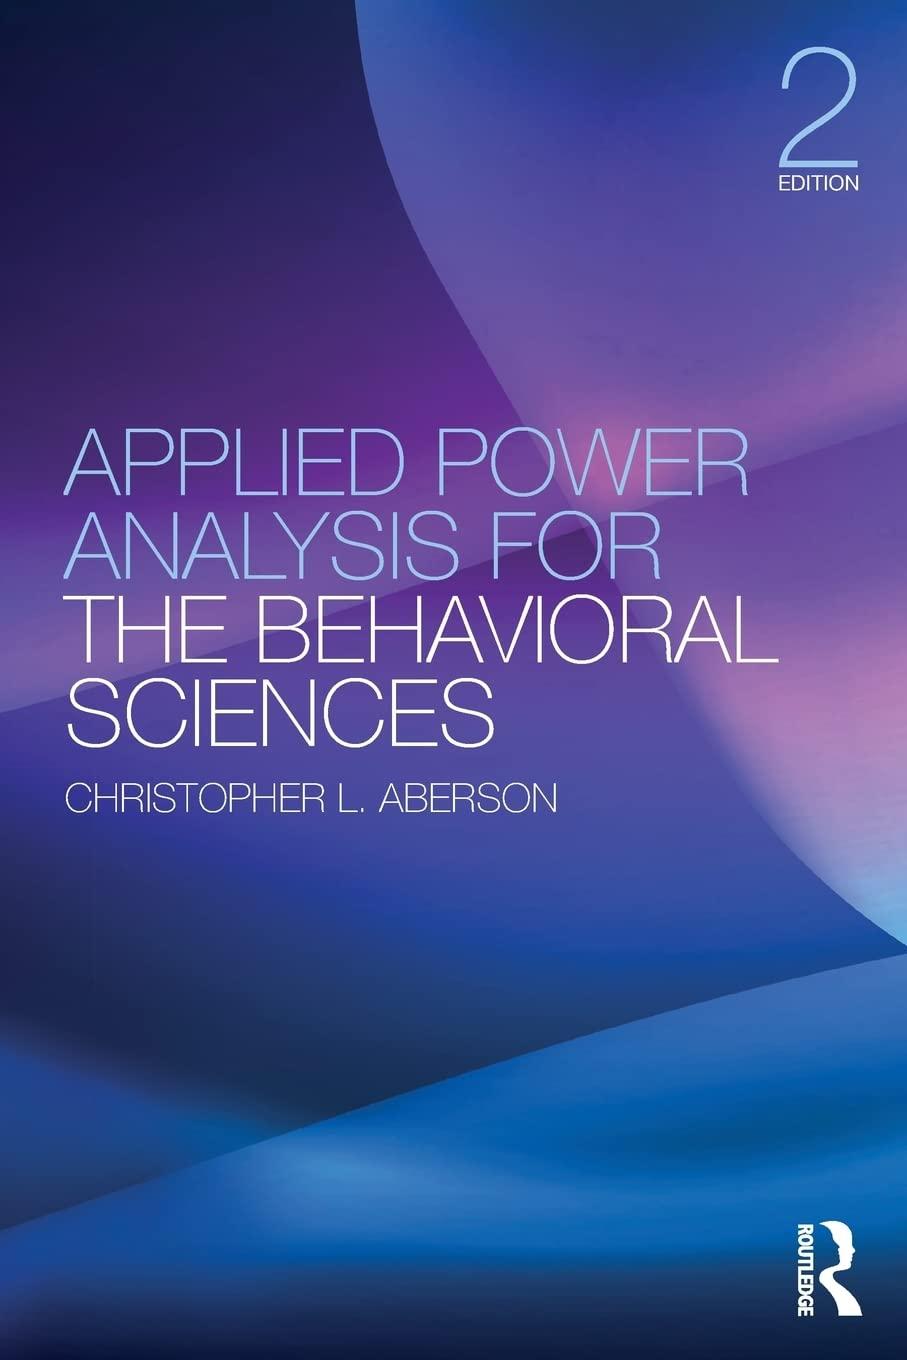 applied power analysis for the behavioral sciences 2nd edition christopher l. aberson 1138044598,